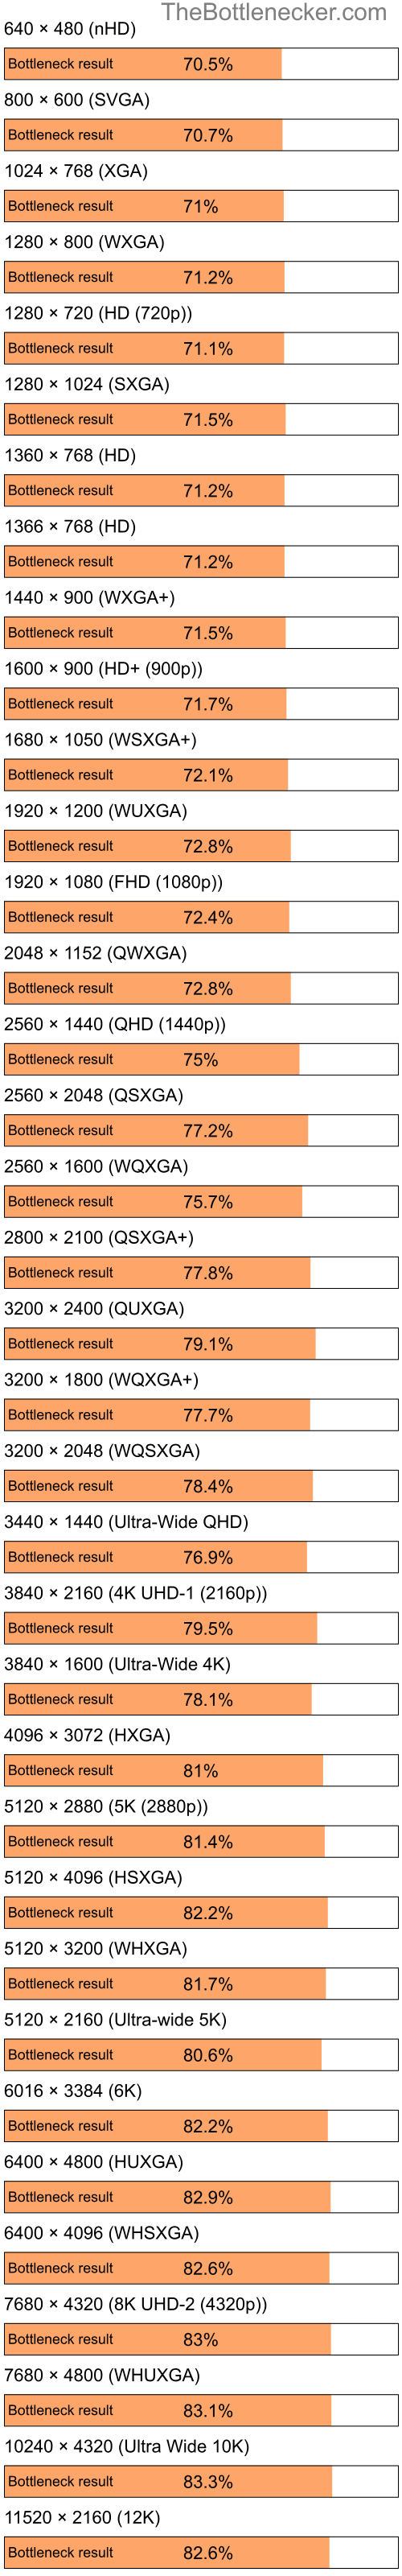 Bottleneck results by resolution for Intel Pentium 4 and AMD Mobility Radeon X2300 in General Tasks